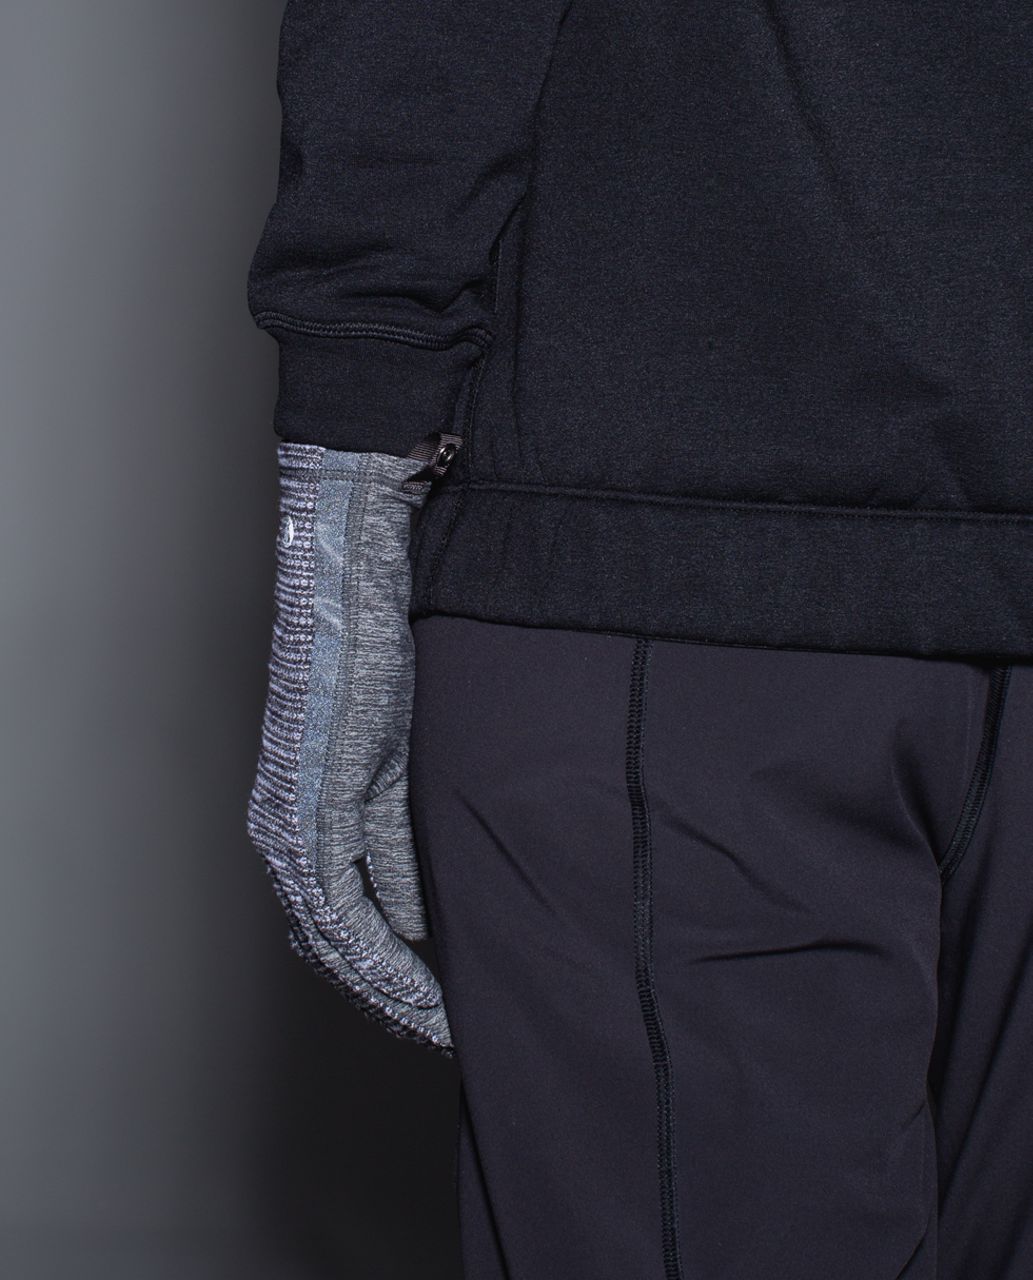 Lululemon Run With Me Gloves - Black (First Release)